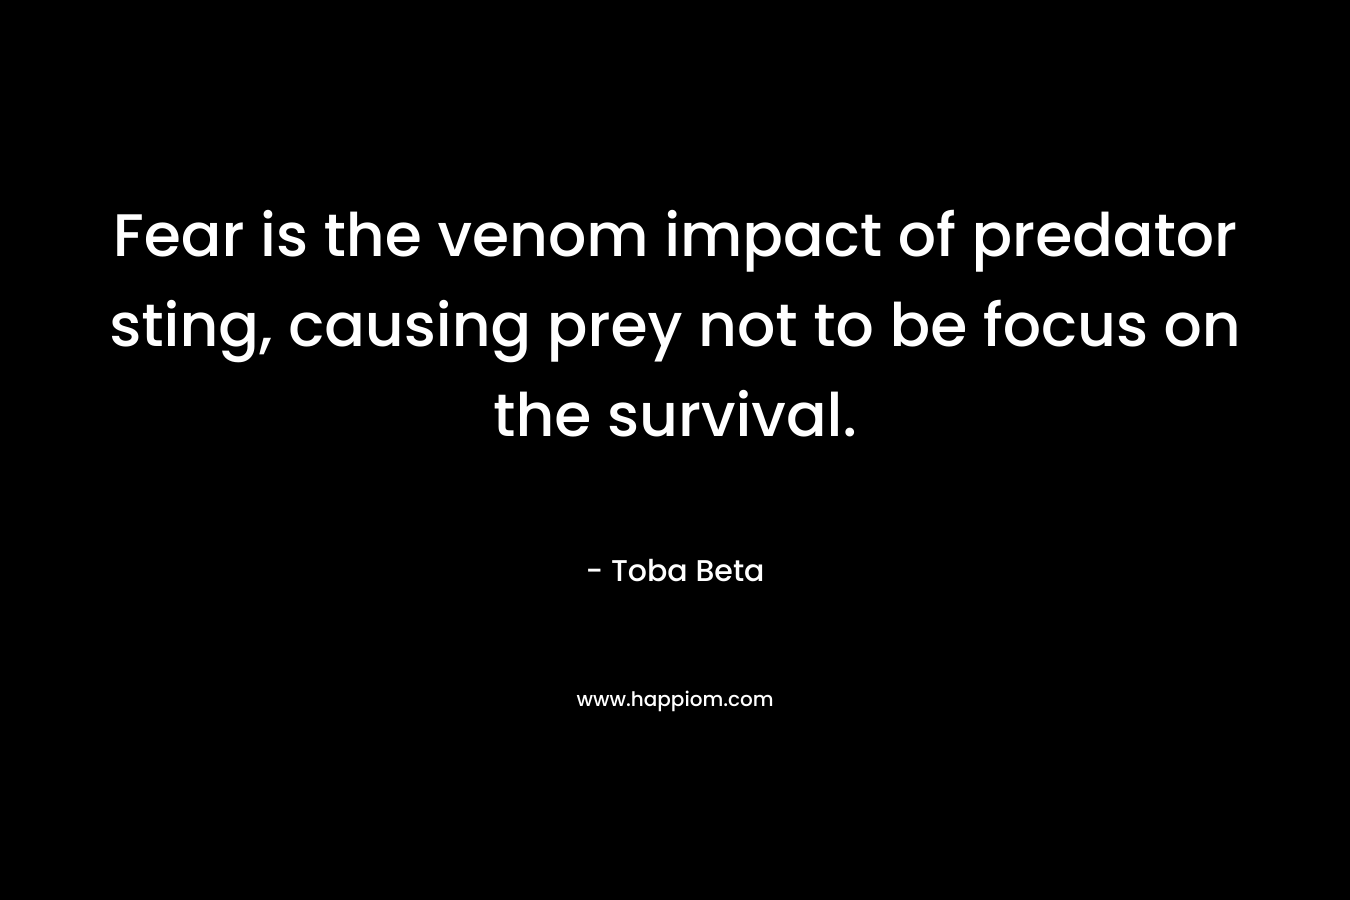 Fear is the venom impact of predator sting, causing prey not to be focus on the survival. – Toba Beta